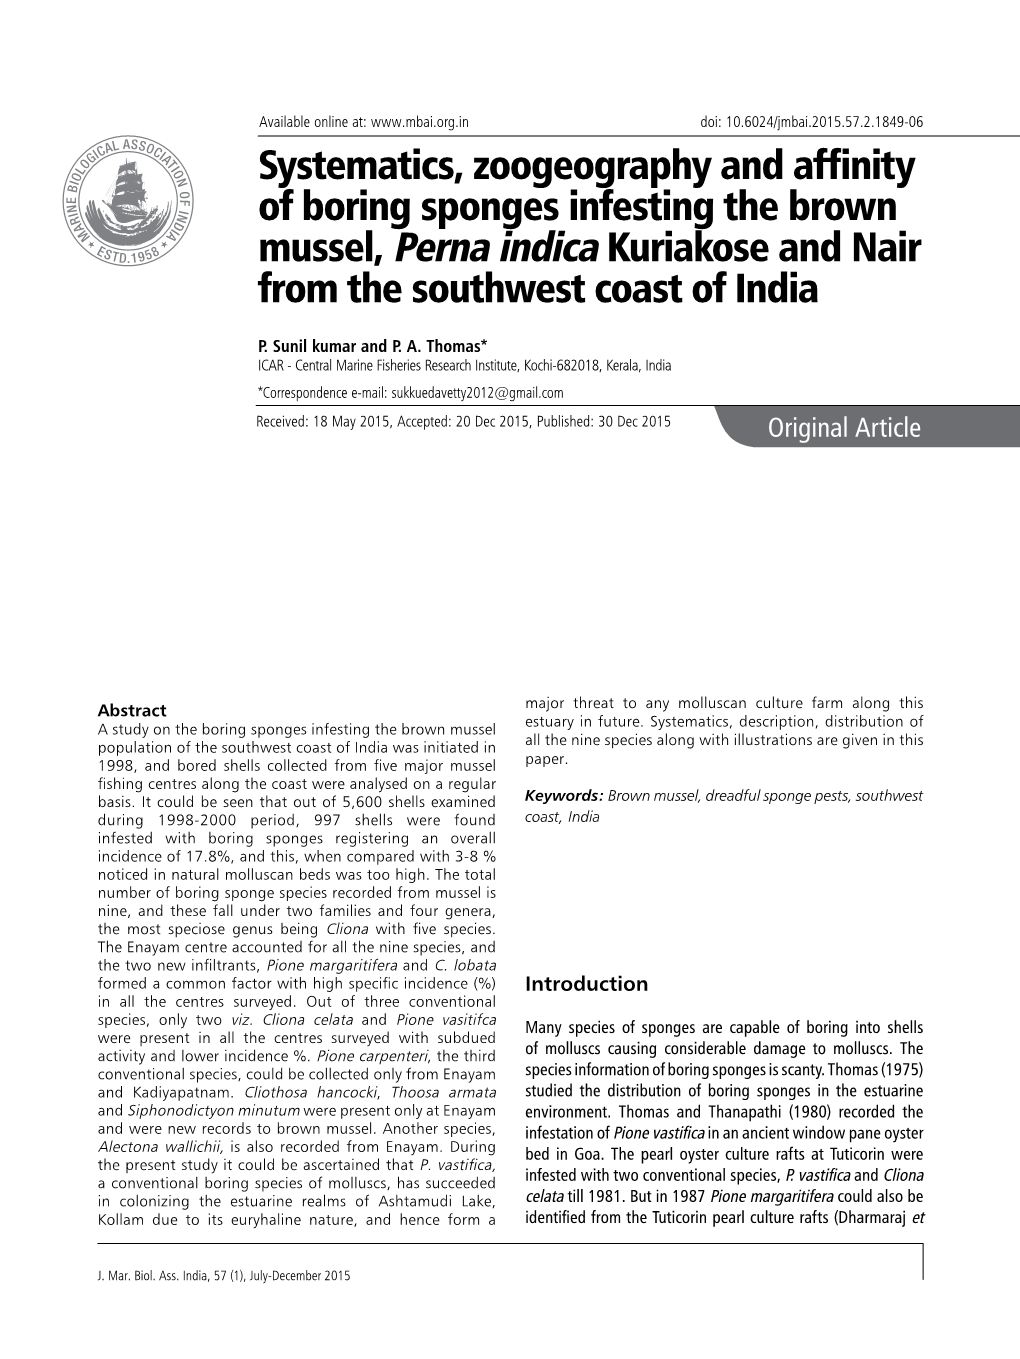 Systematics, Zoogeography and Affinity of Boring Sponges Infesting the Brown Mussel, Perna Indica Kuriakose and Nair from the Southwest Coast of India